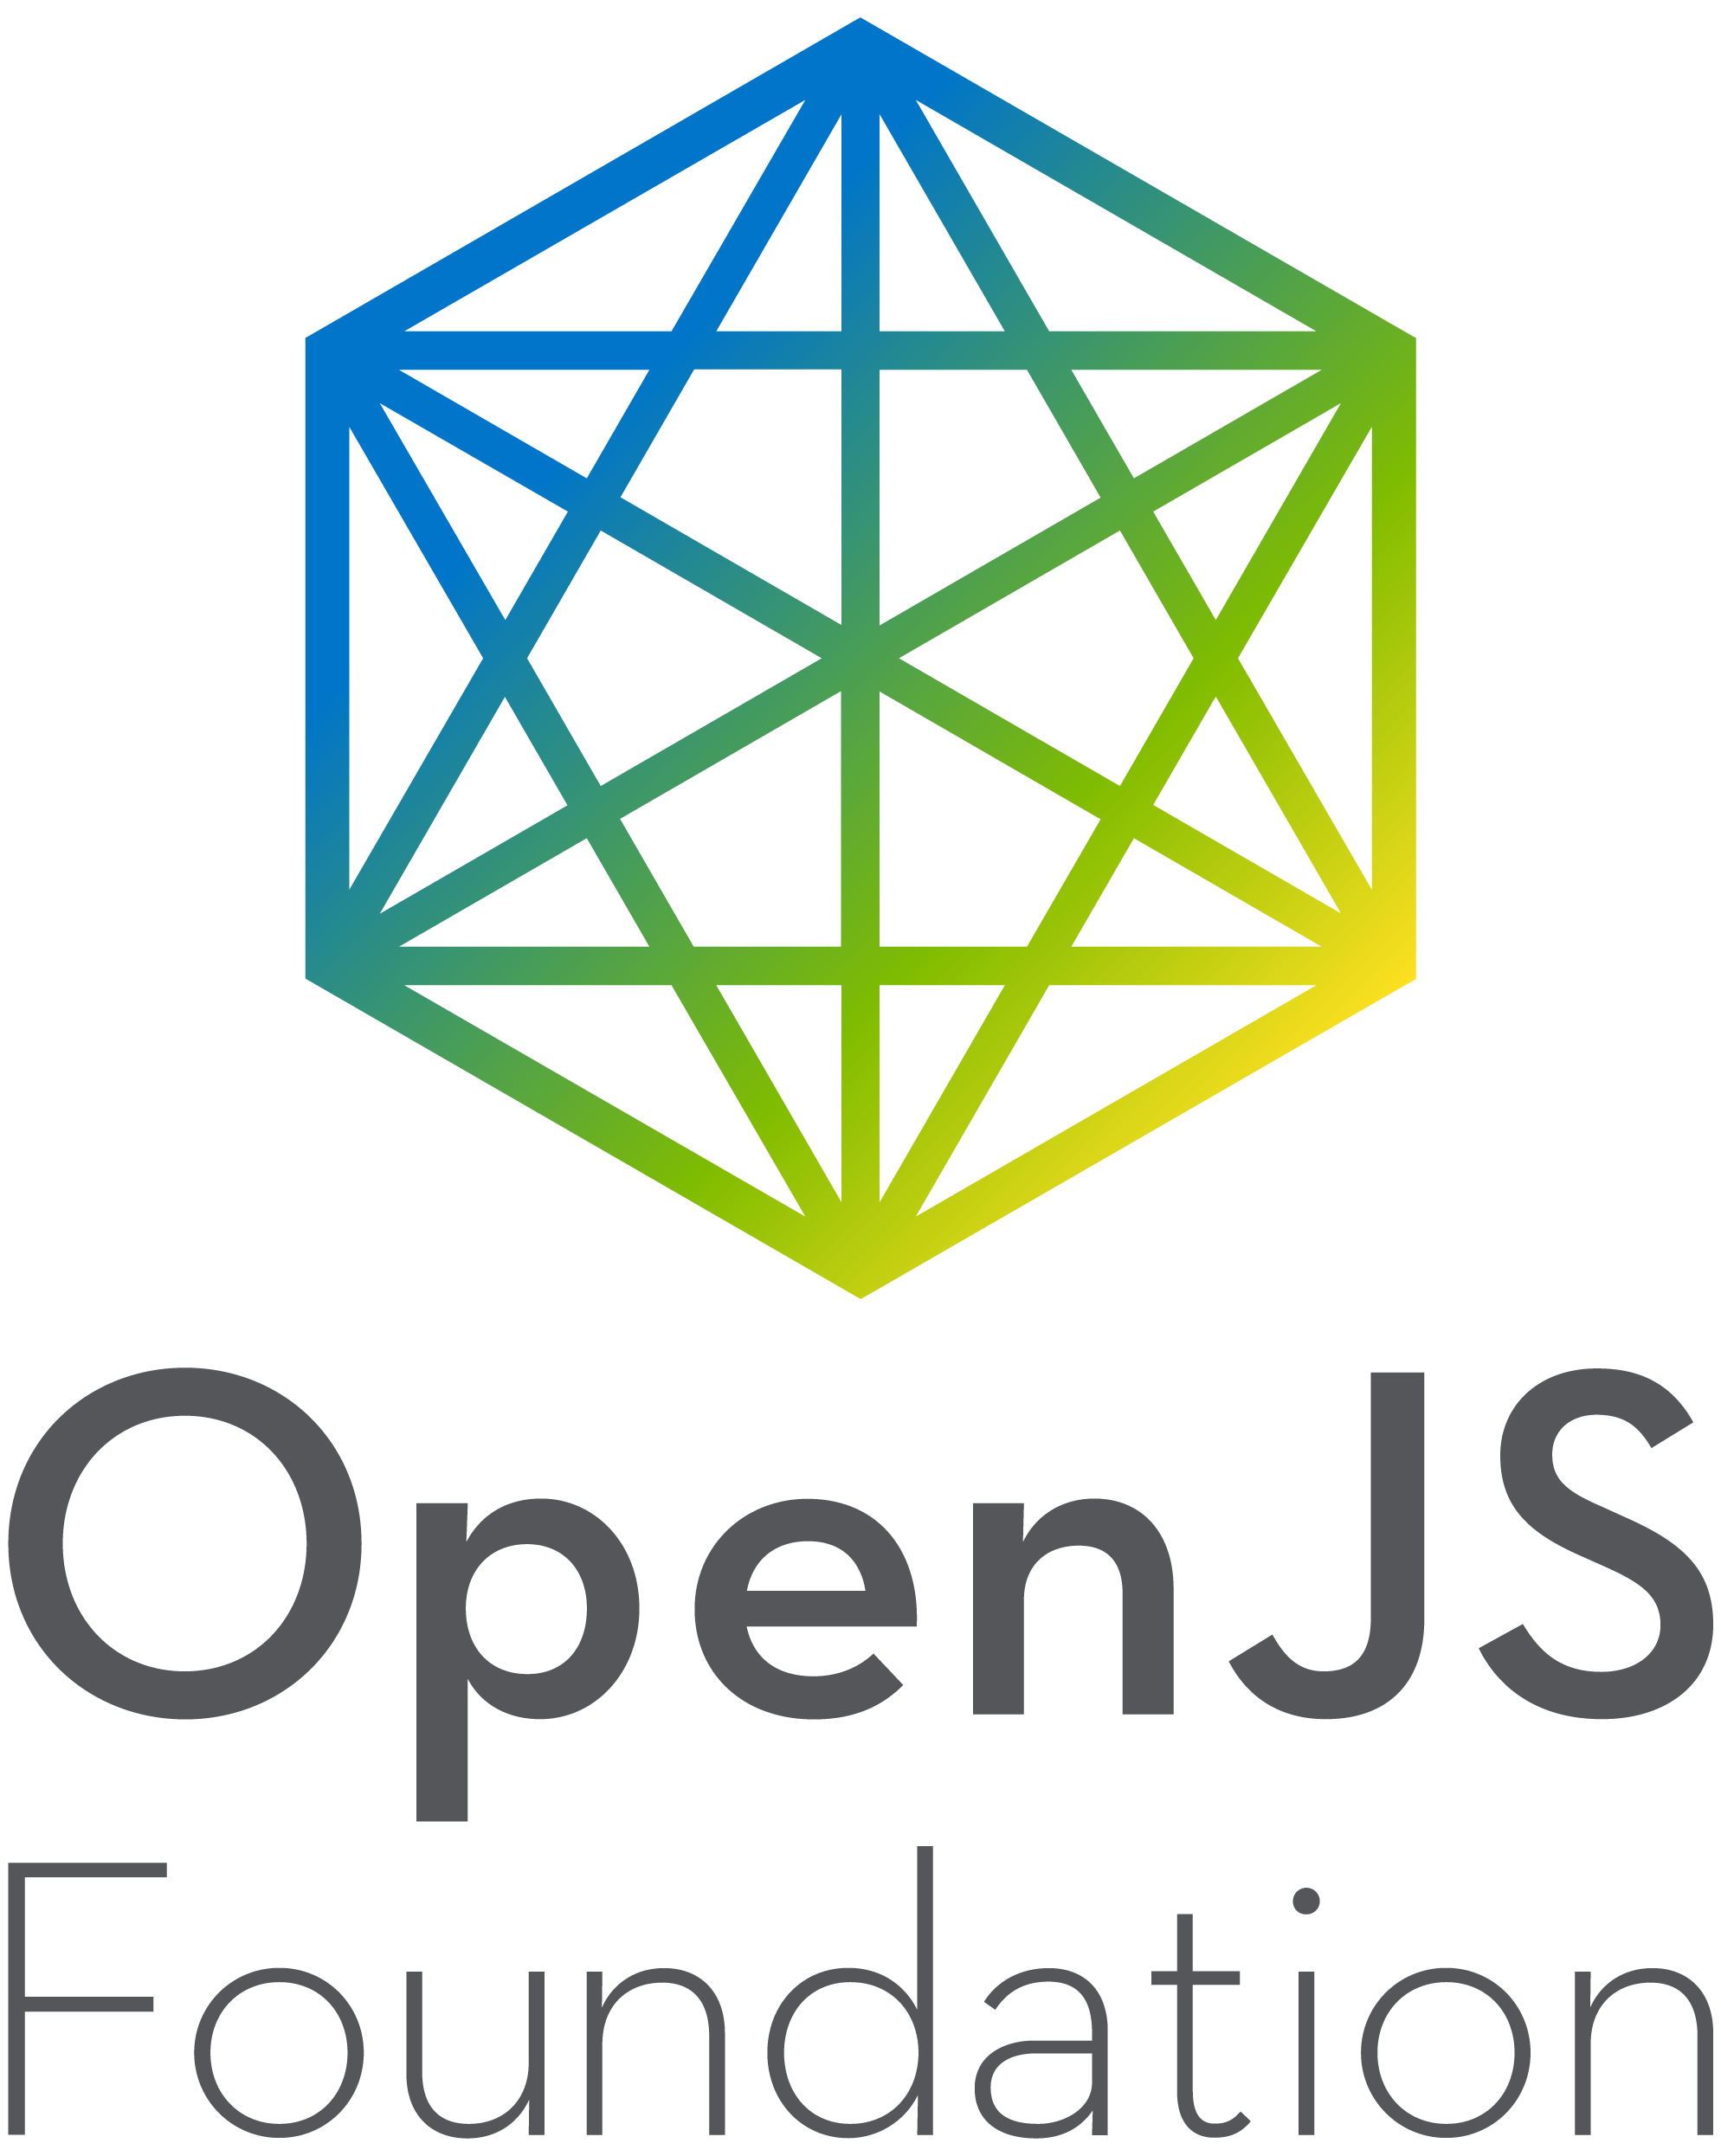 openjs_foundation-logo-stacked-color.png